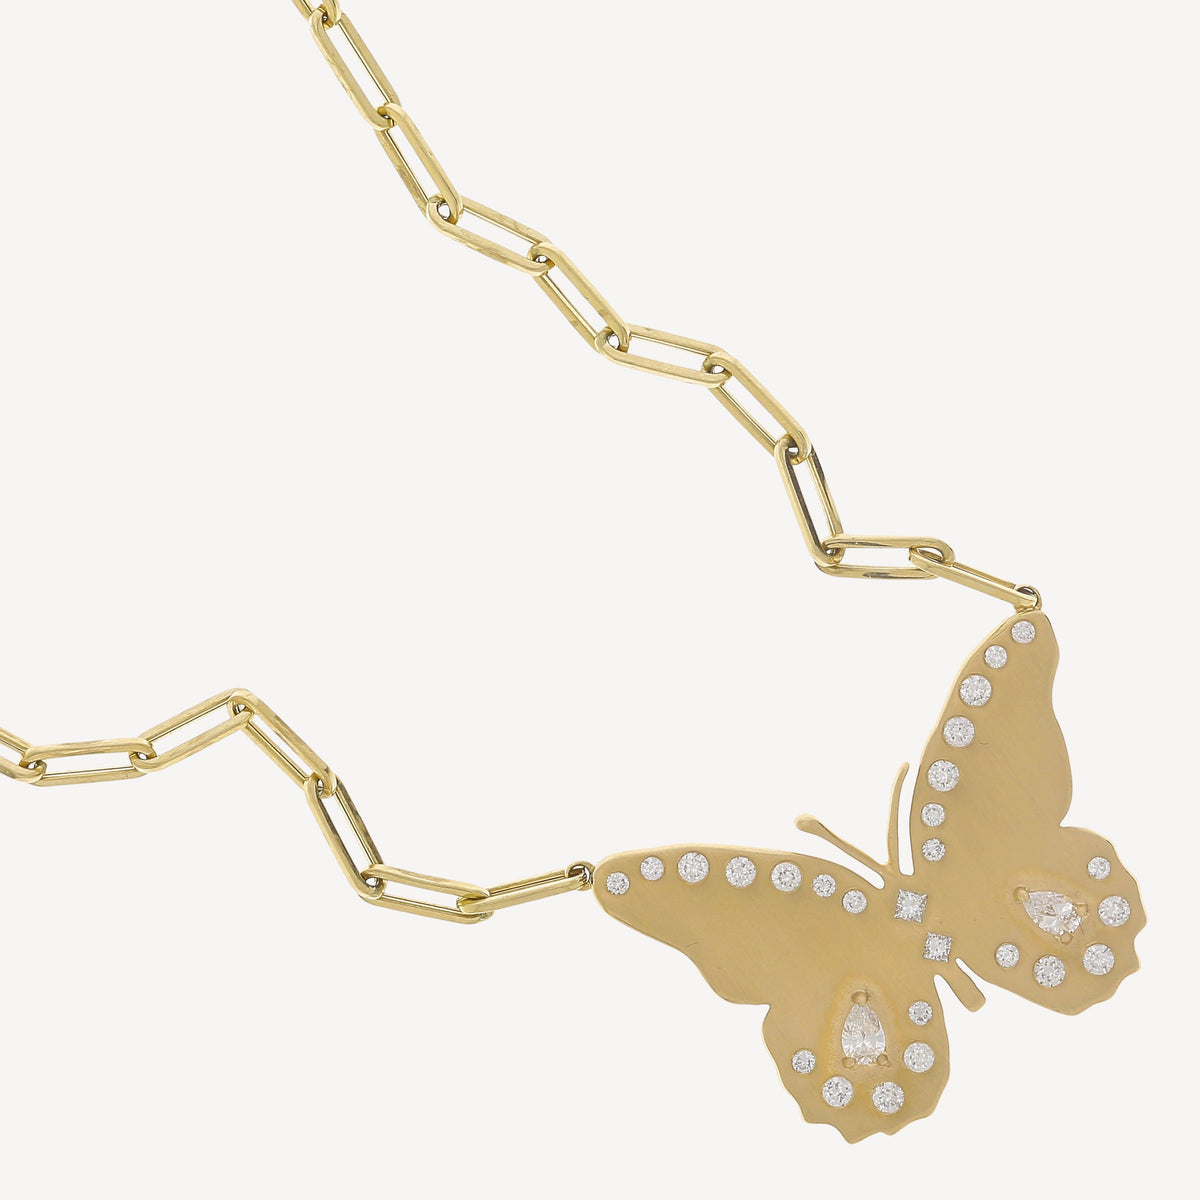 Jessica Large Butterfly Necklace